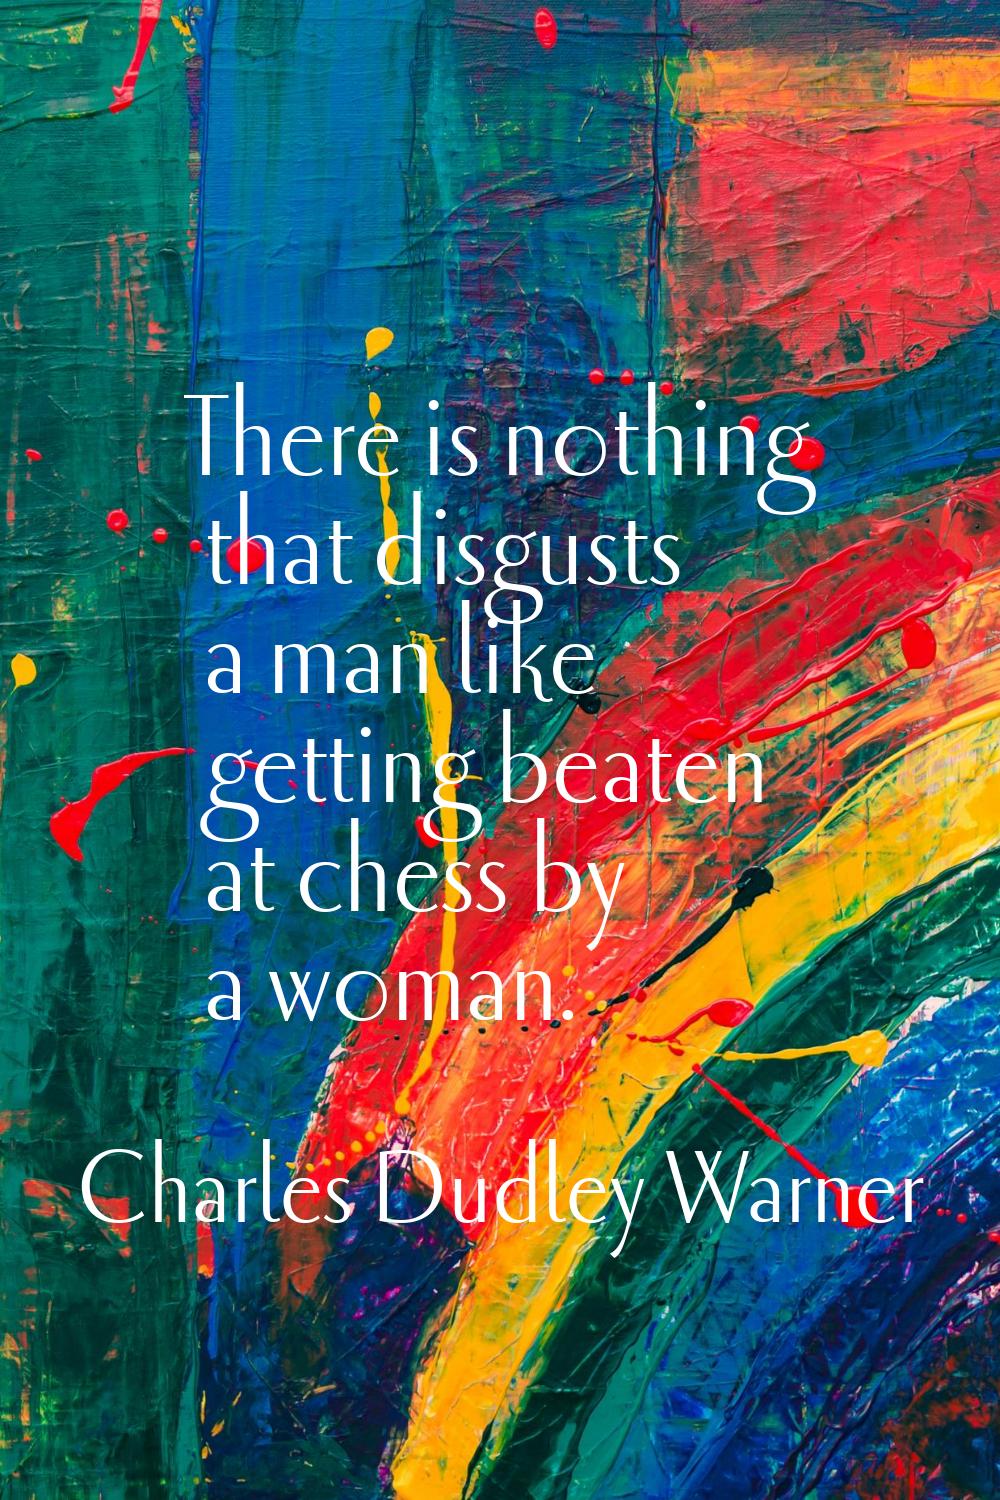 There is nothing that disgusts a man like getting beaten at chess by a woman.